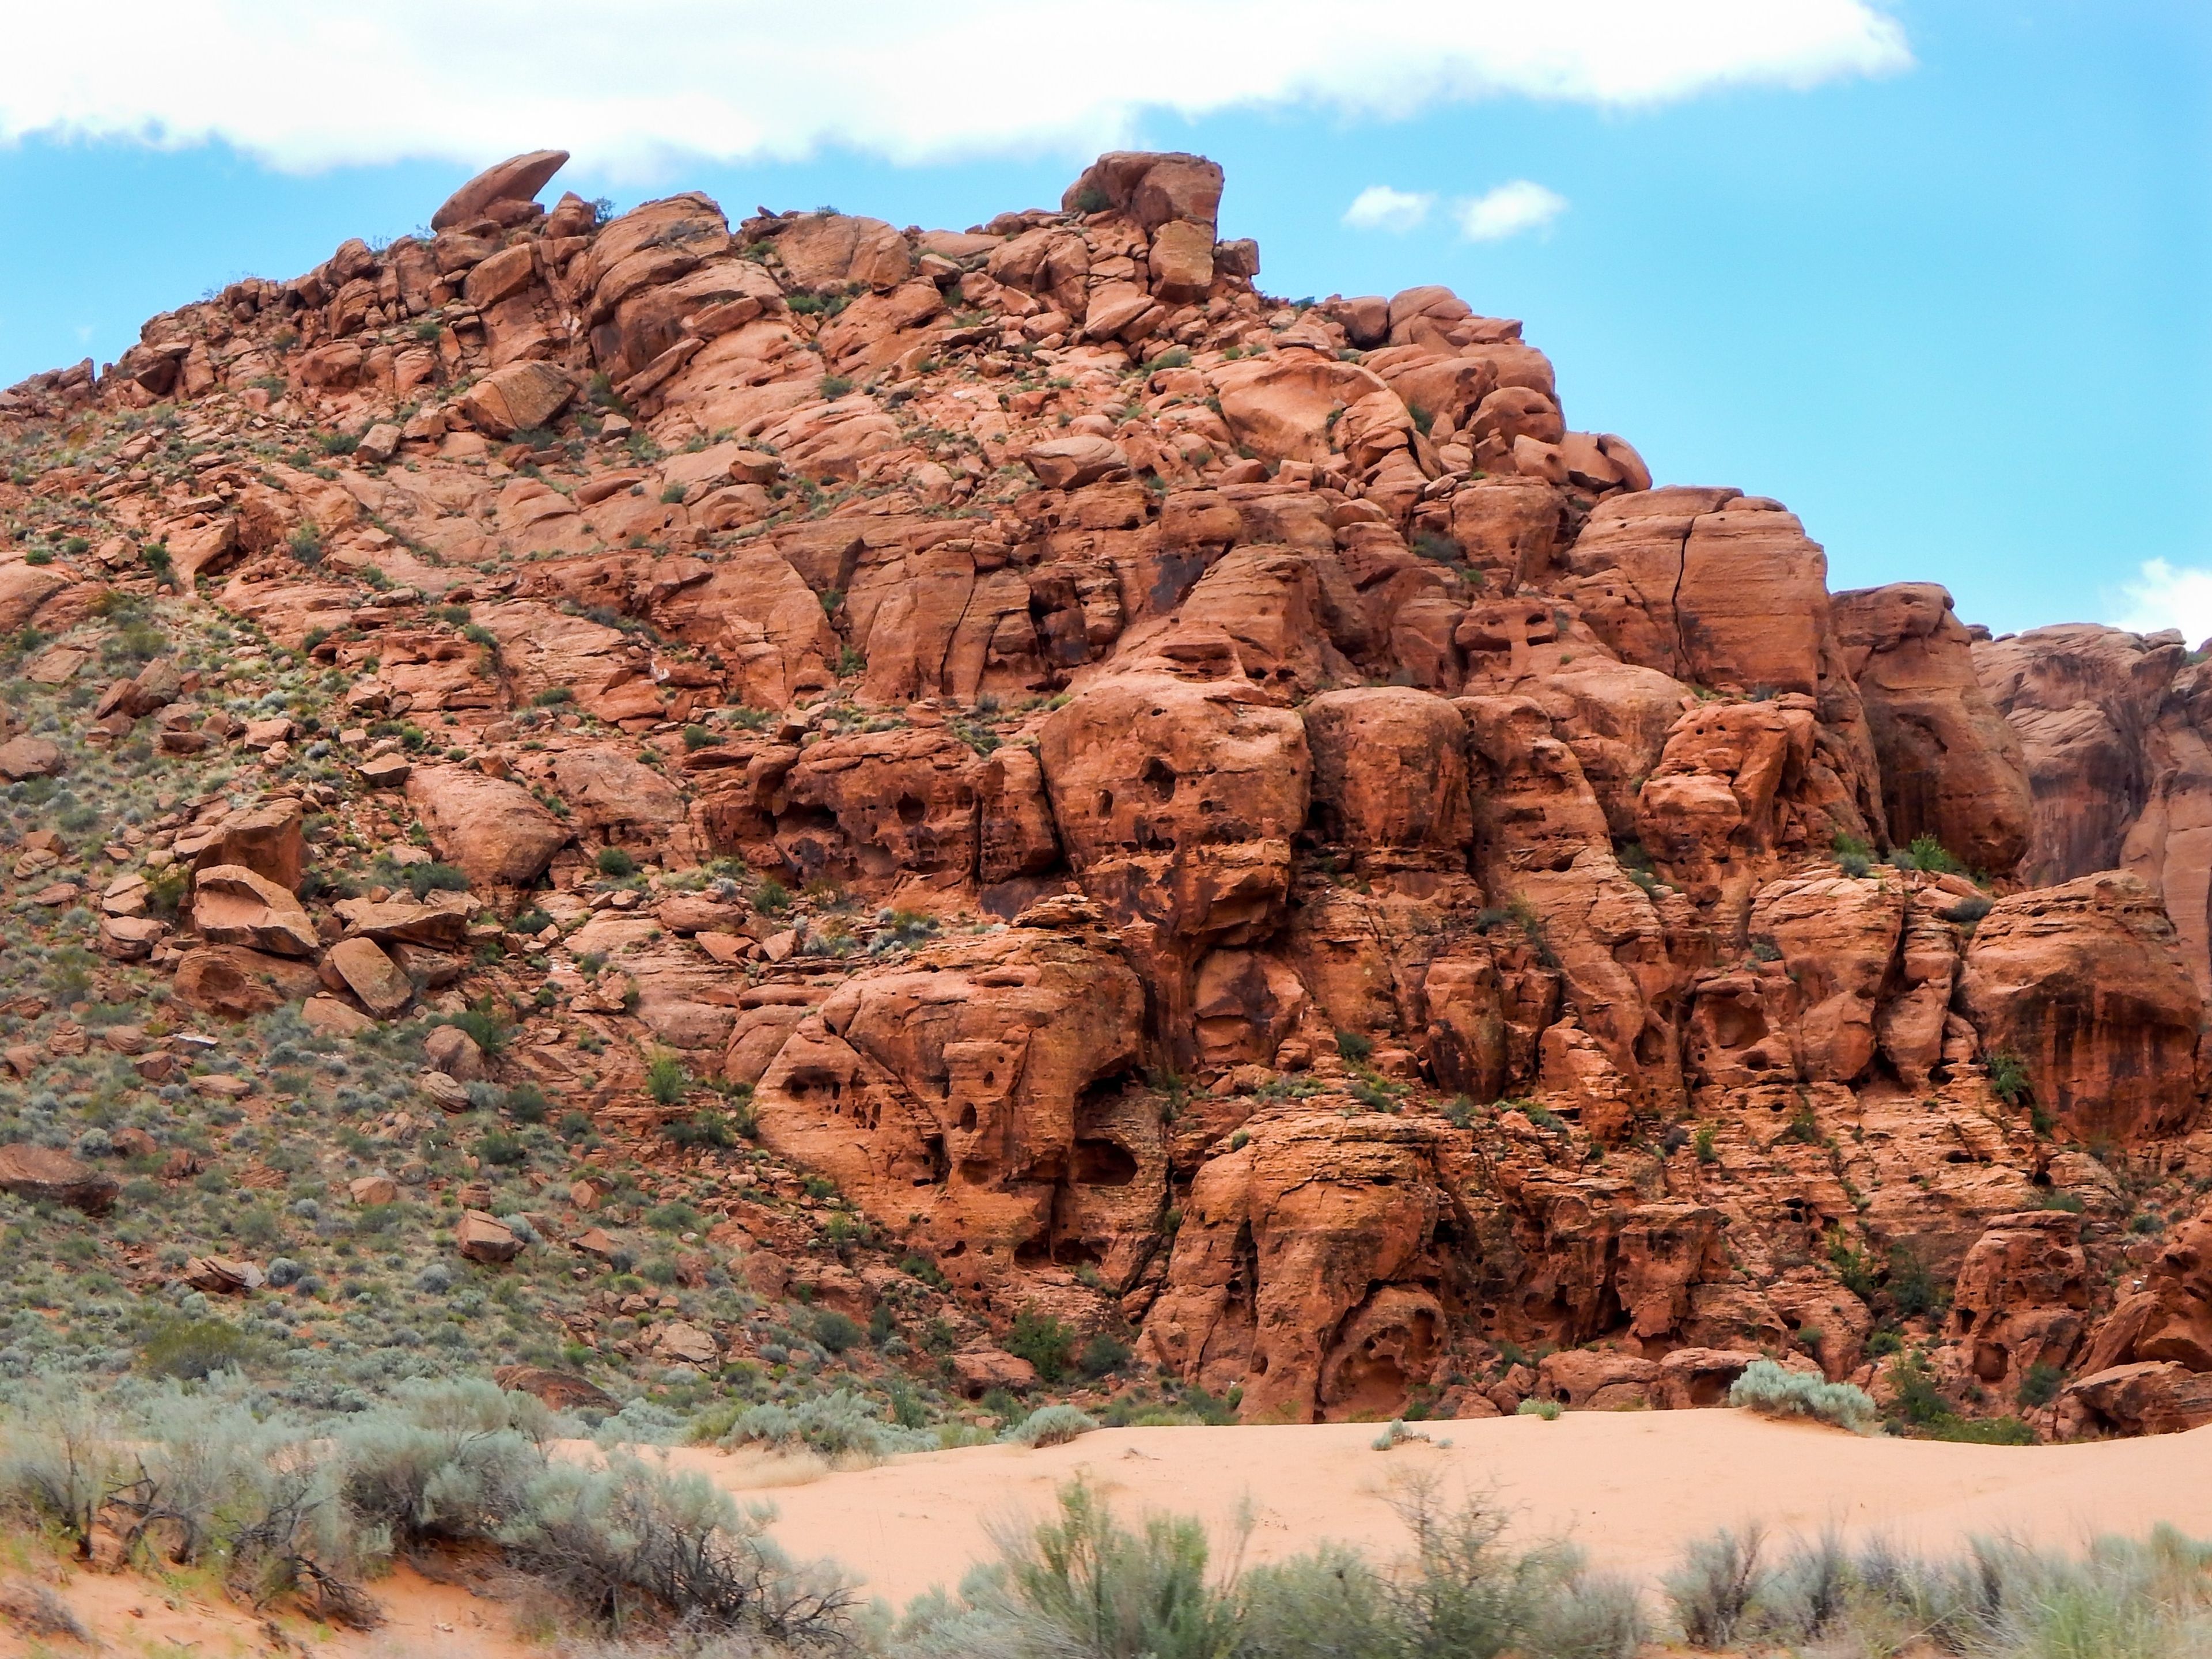 Red rocks in Snow Canyon State Park in southern Utah.